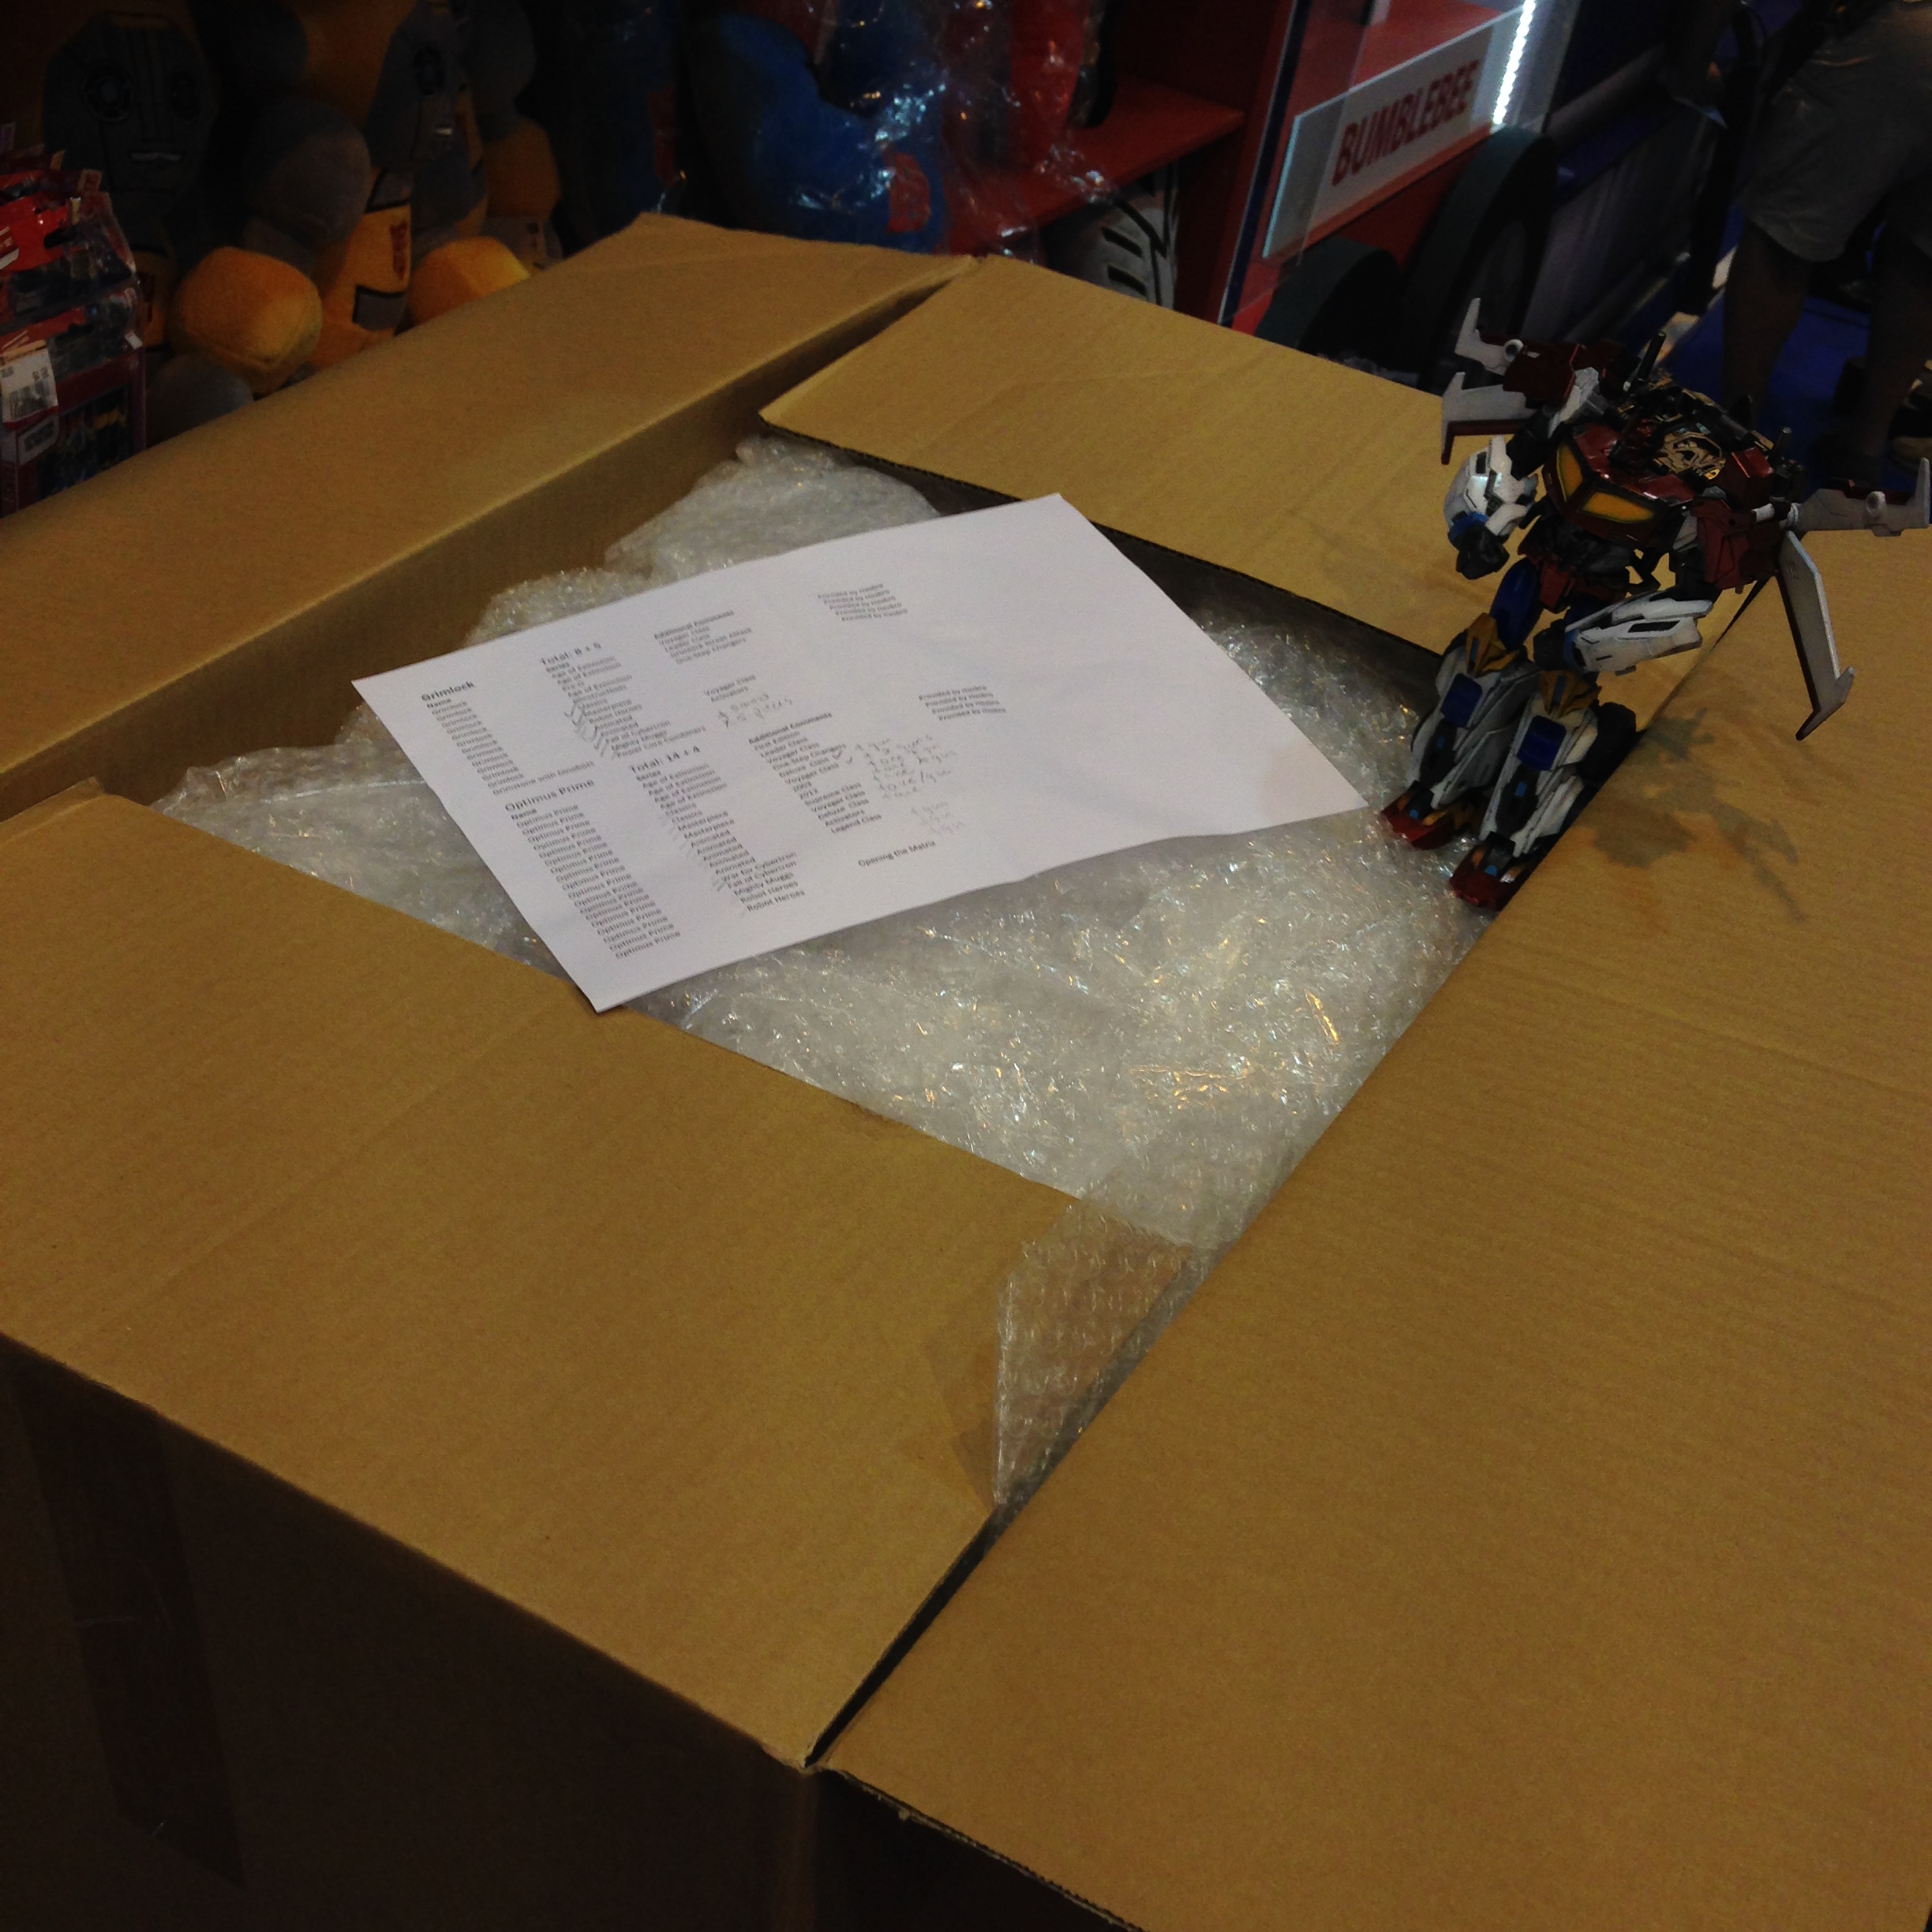 Victory Saber opens the box of Transformers.